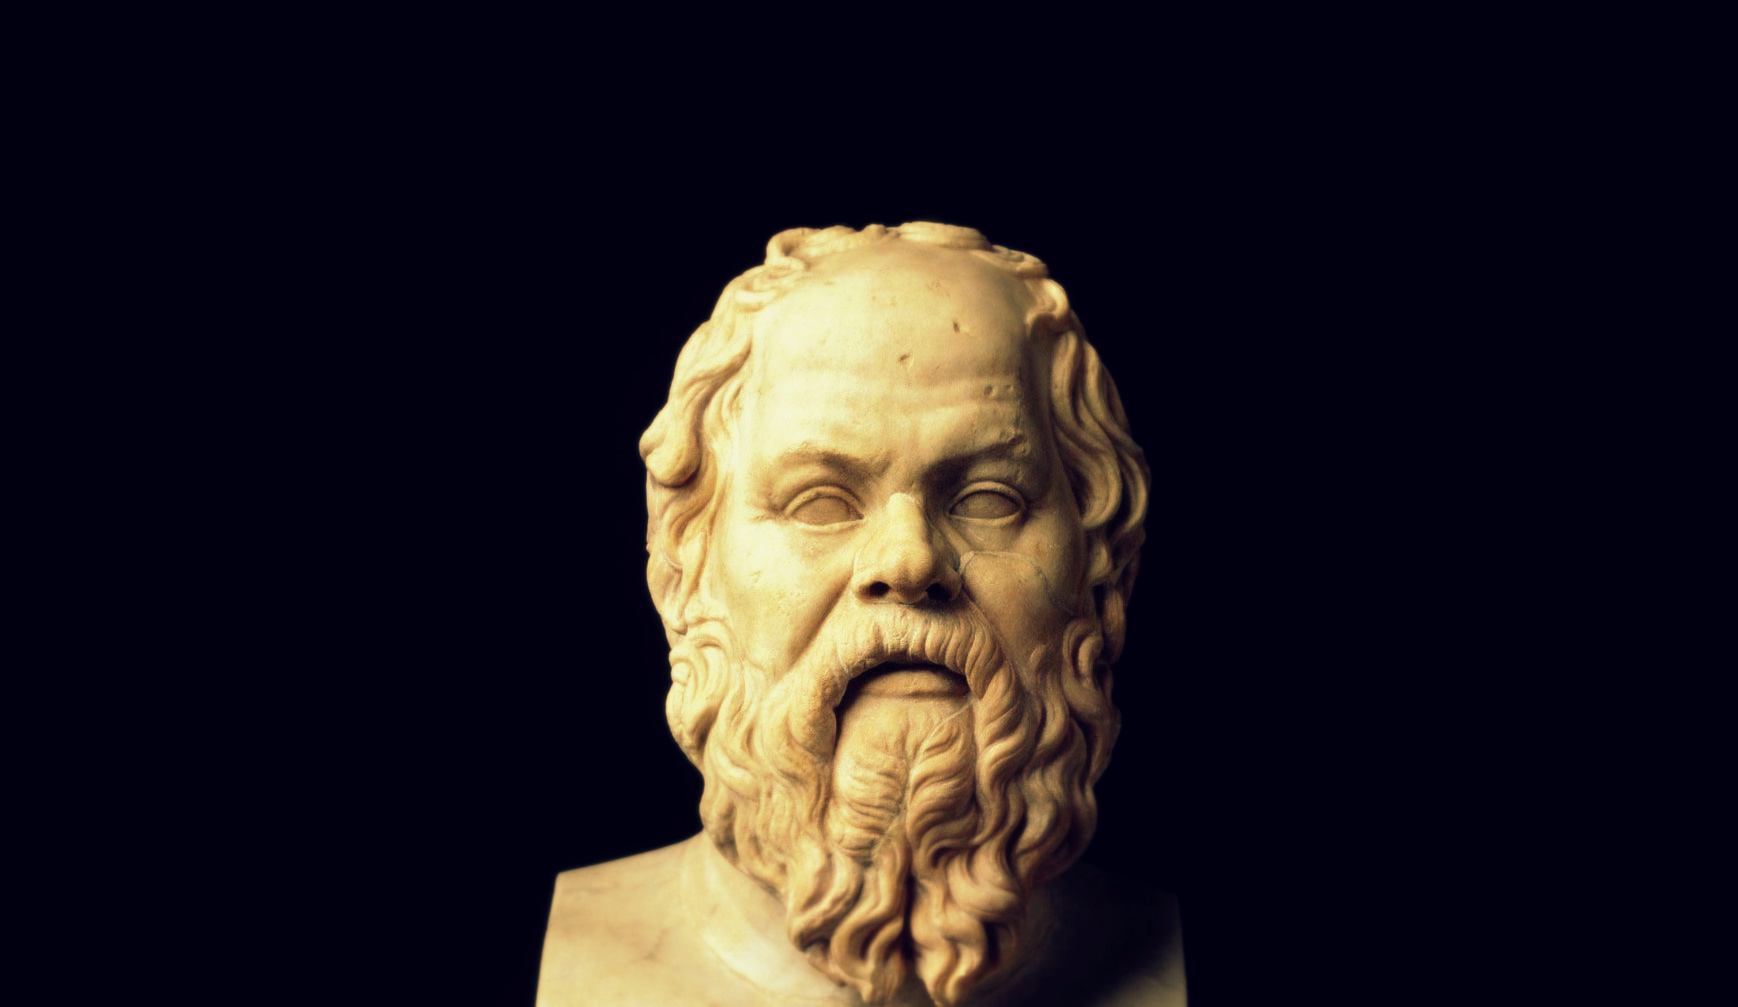 Awesome Socrates Image Wallpaper